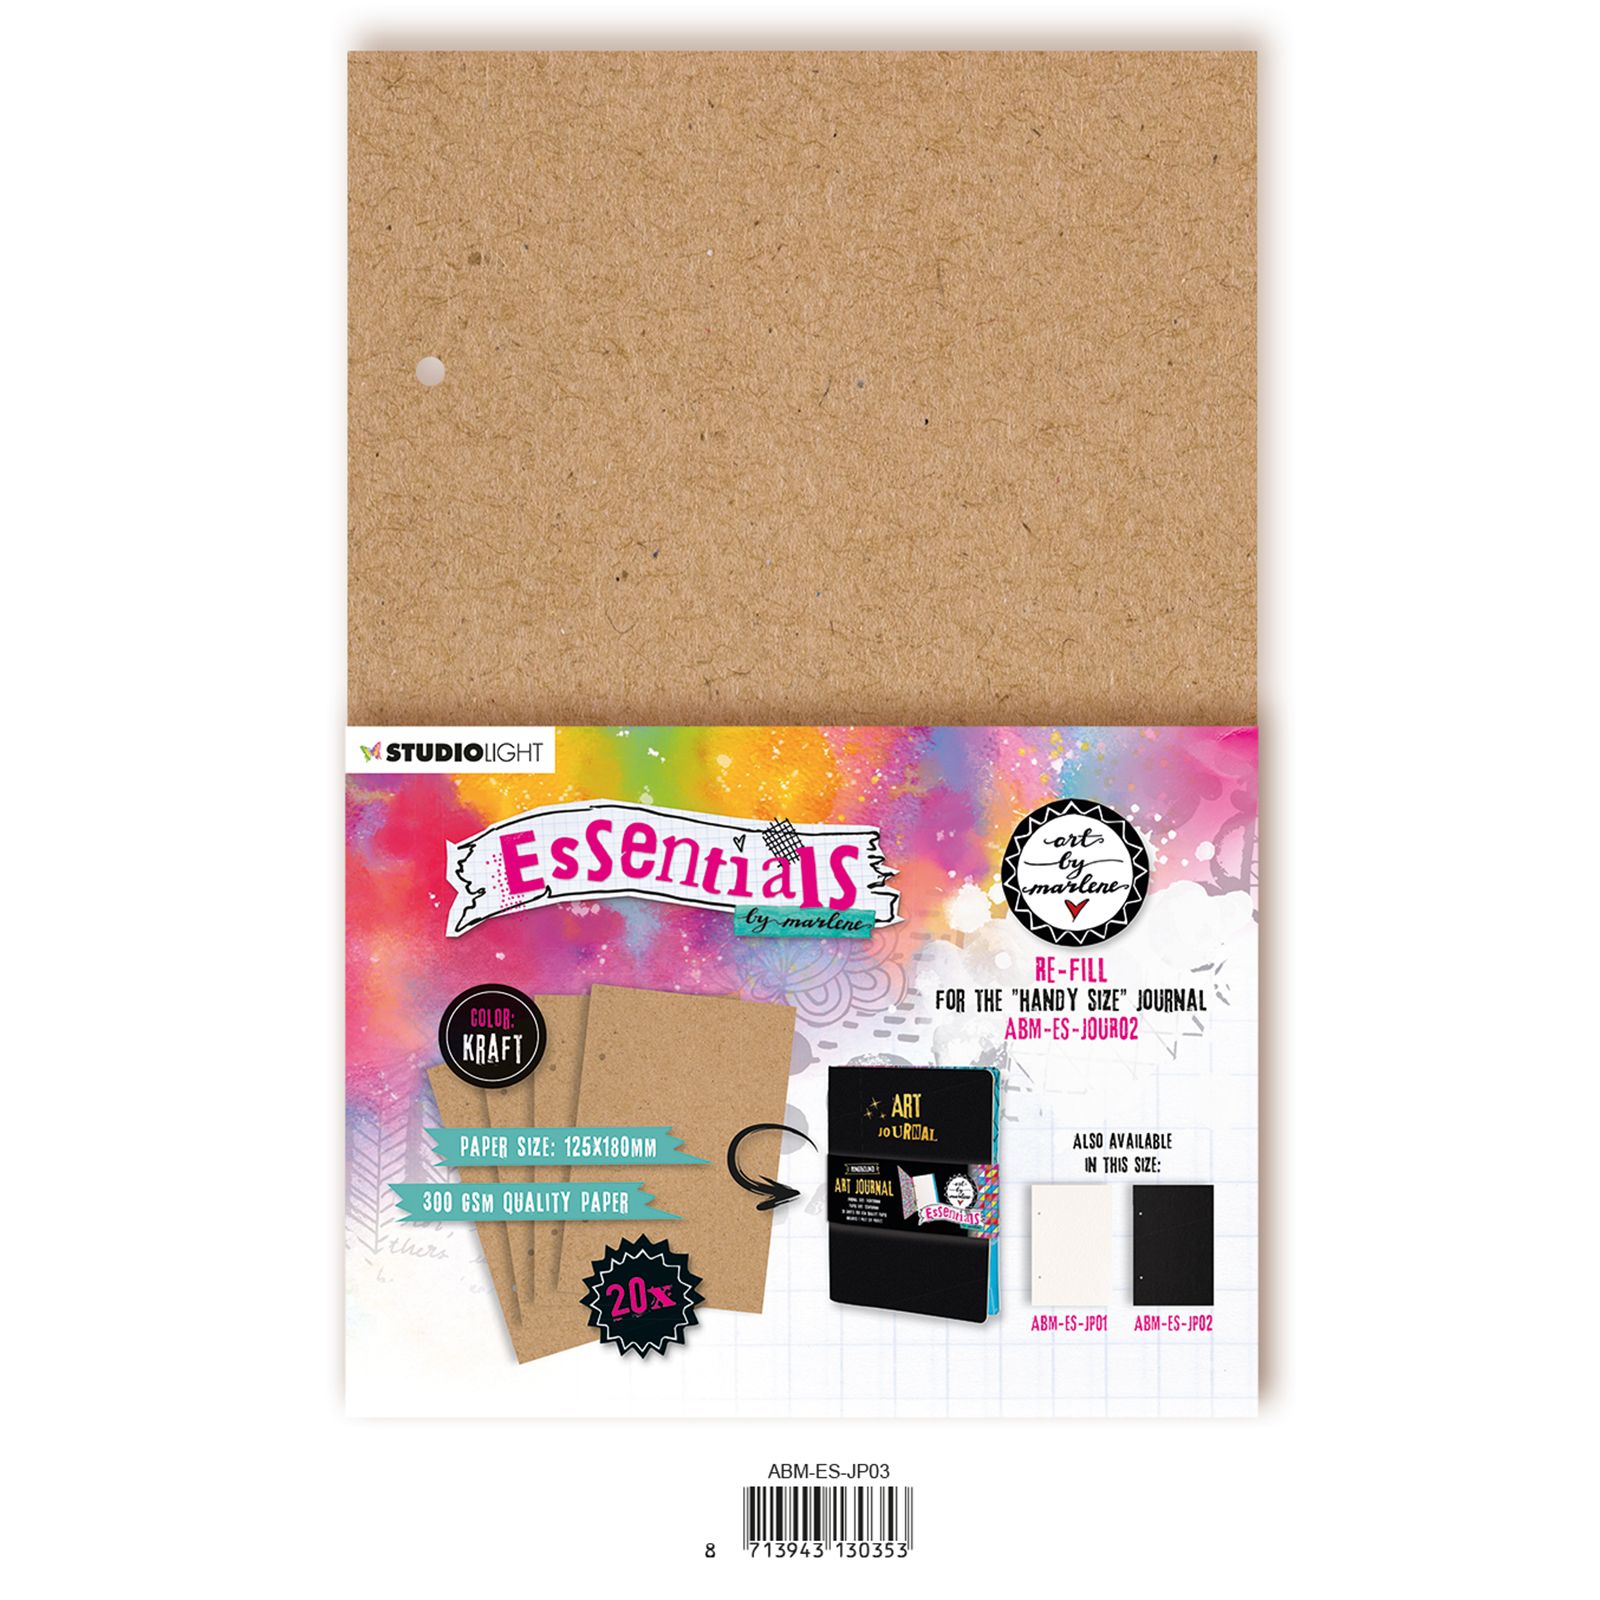 Studio Light Essentials Re-fill Pages for The Handy Size Journal - Kraft